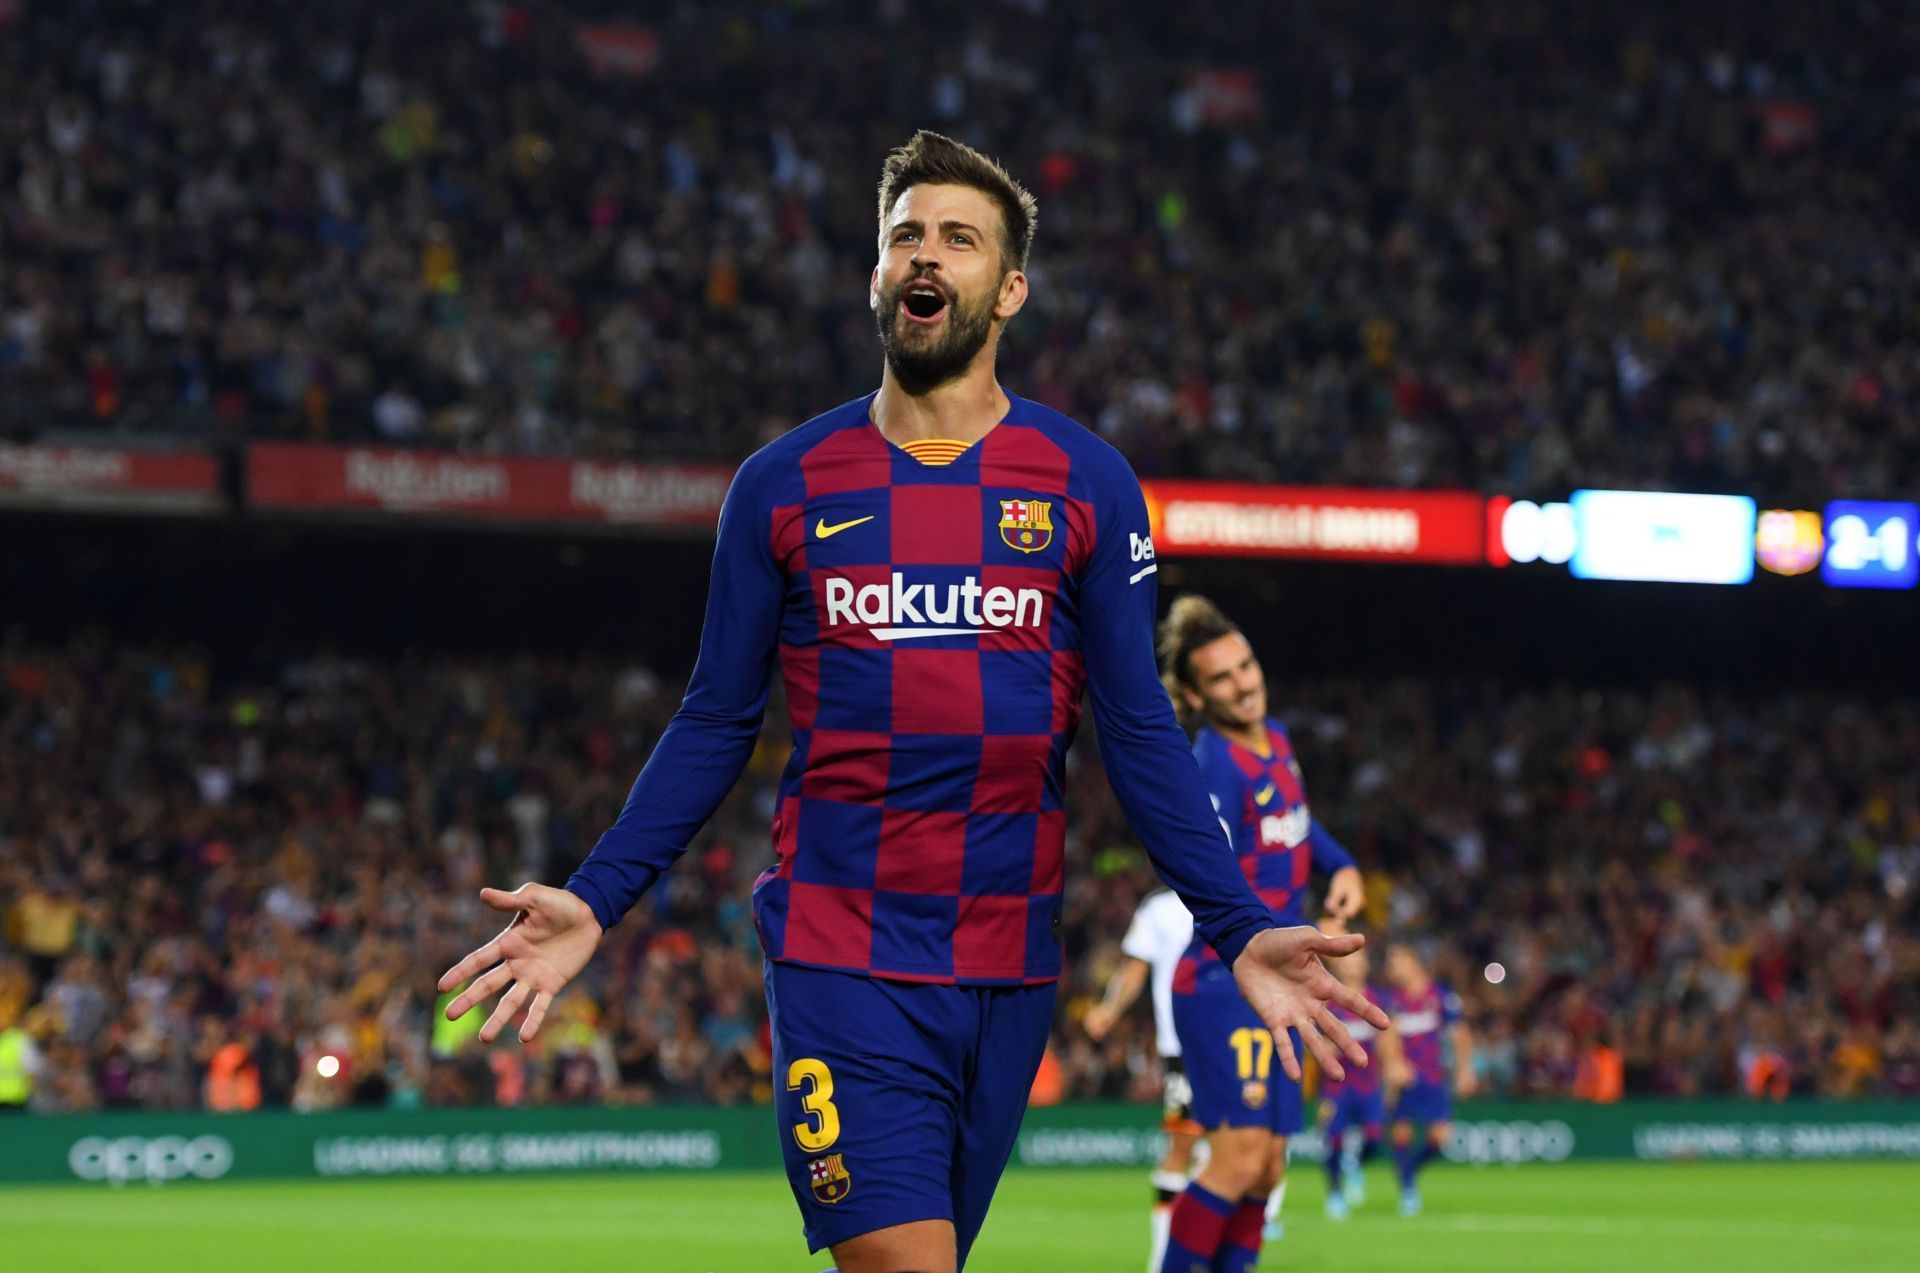 Pique recently took a wage-cut to aid his club